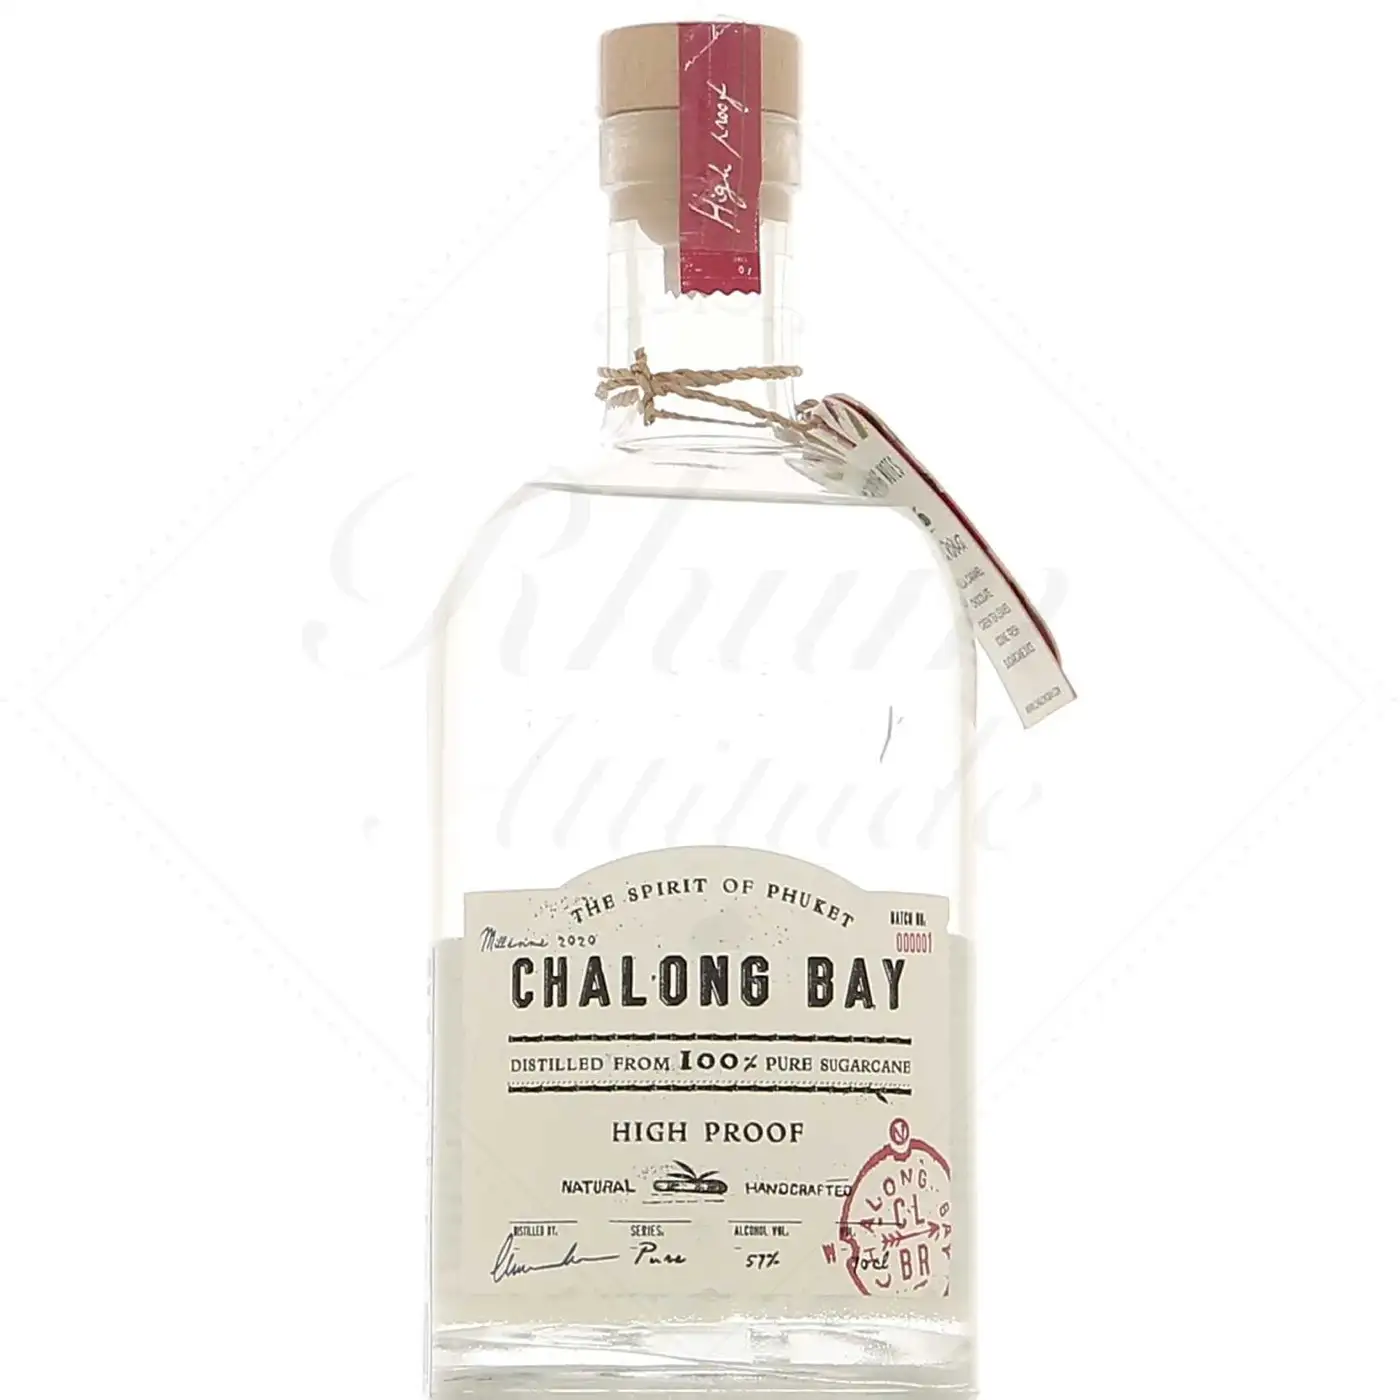 Image of the front of the bottle of the rum Chalong Bay High Proof